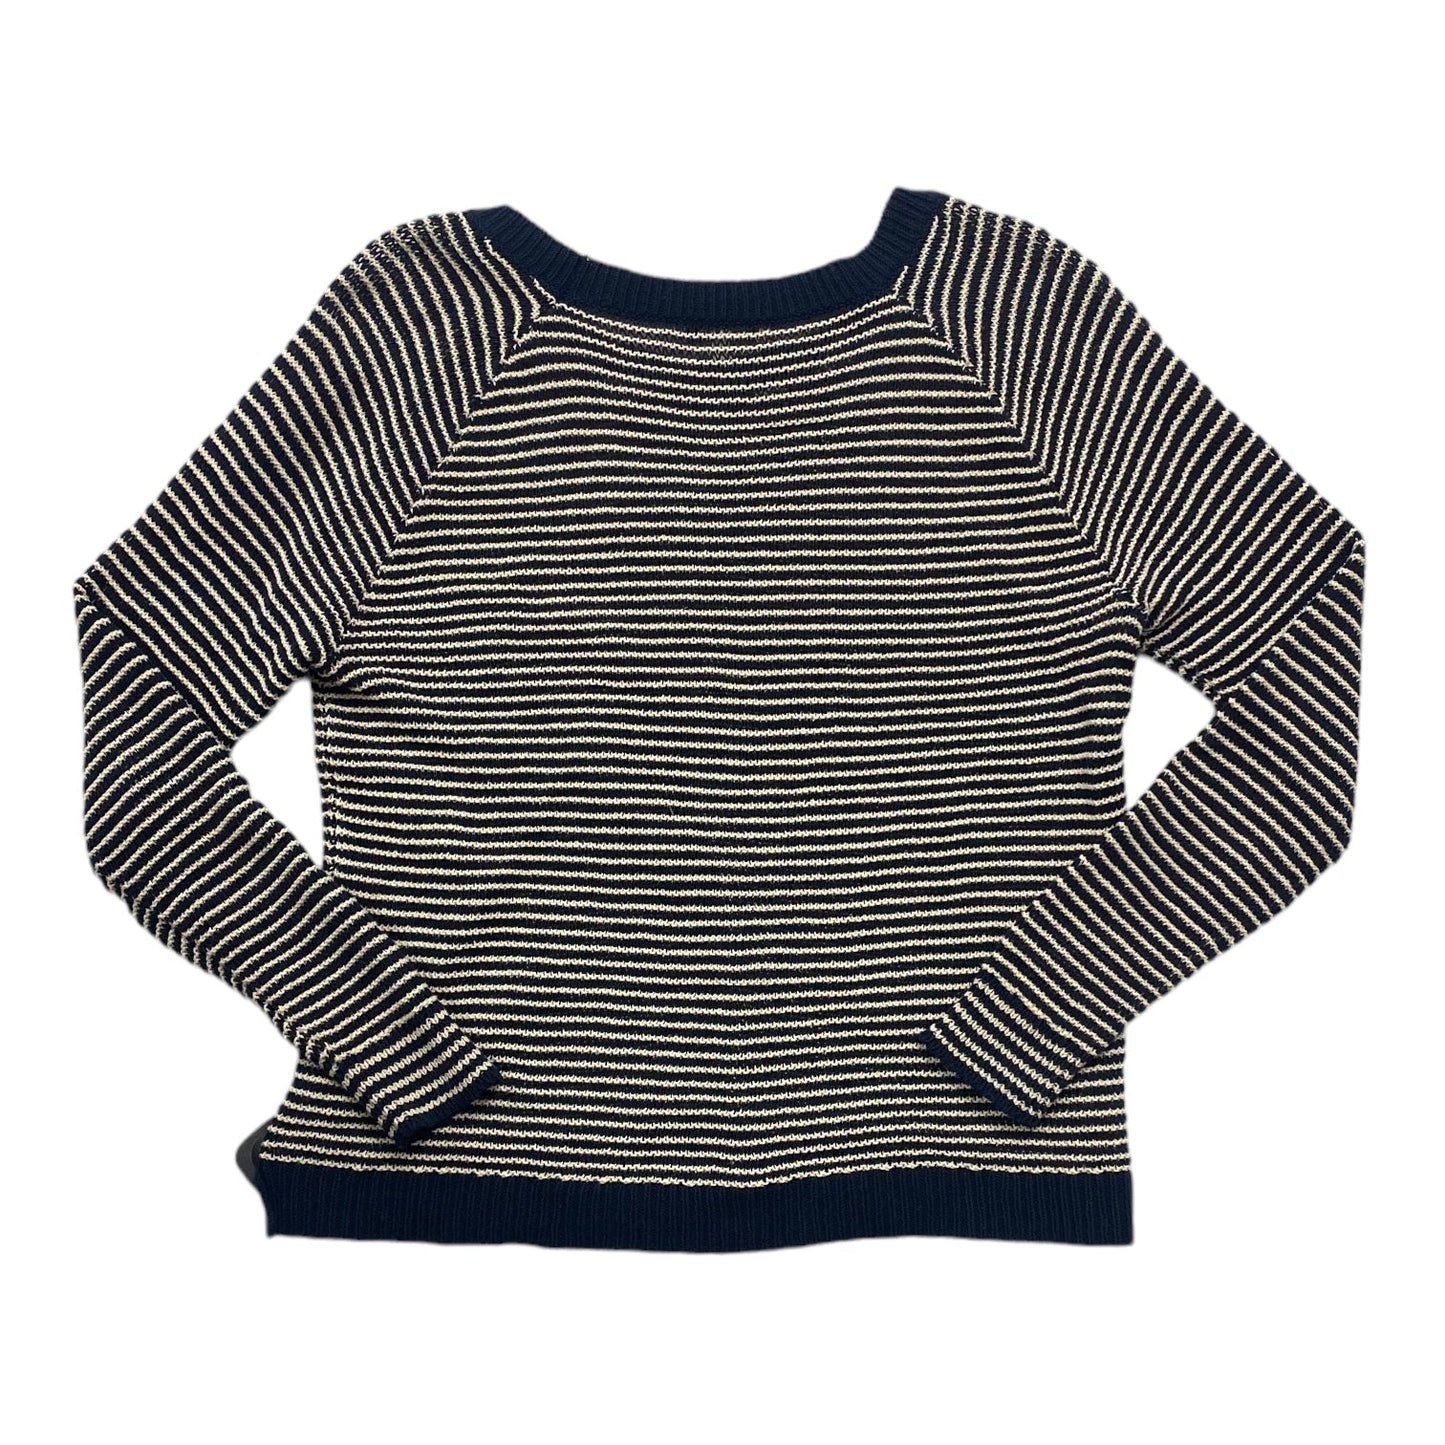 Blue & Tan Sweater Madewell, Size S